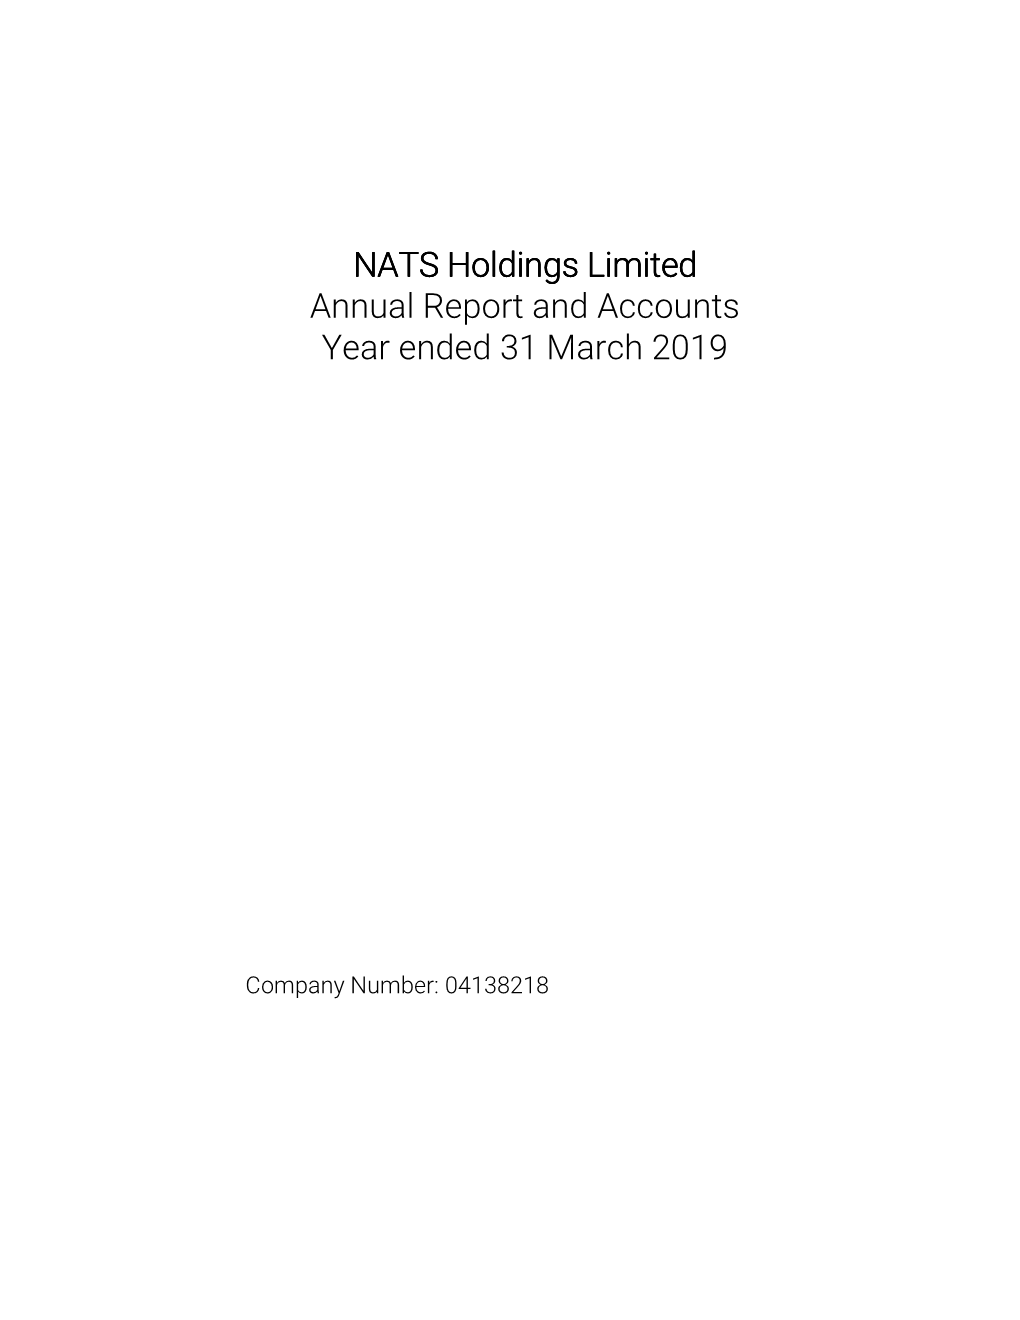 NATS Holdings Limited – Annual Report and Accounts 2019